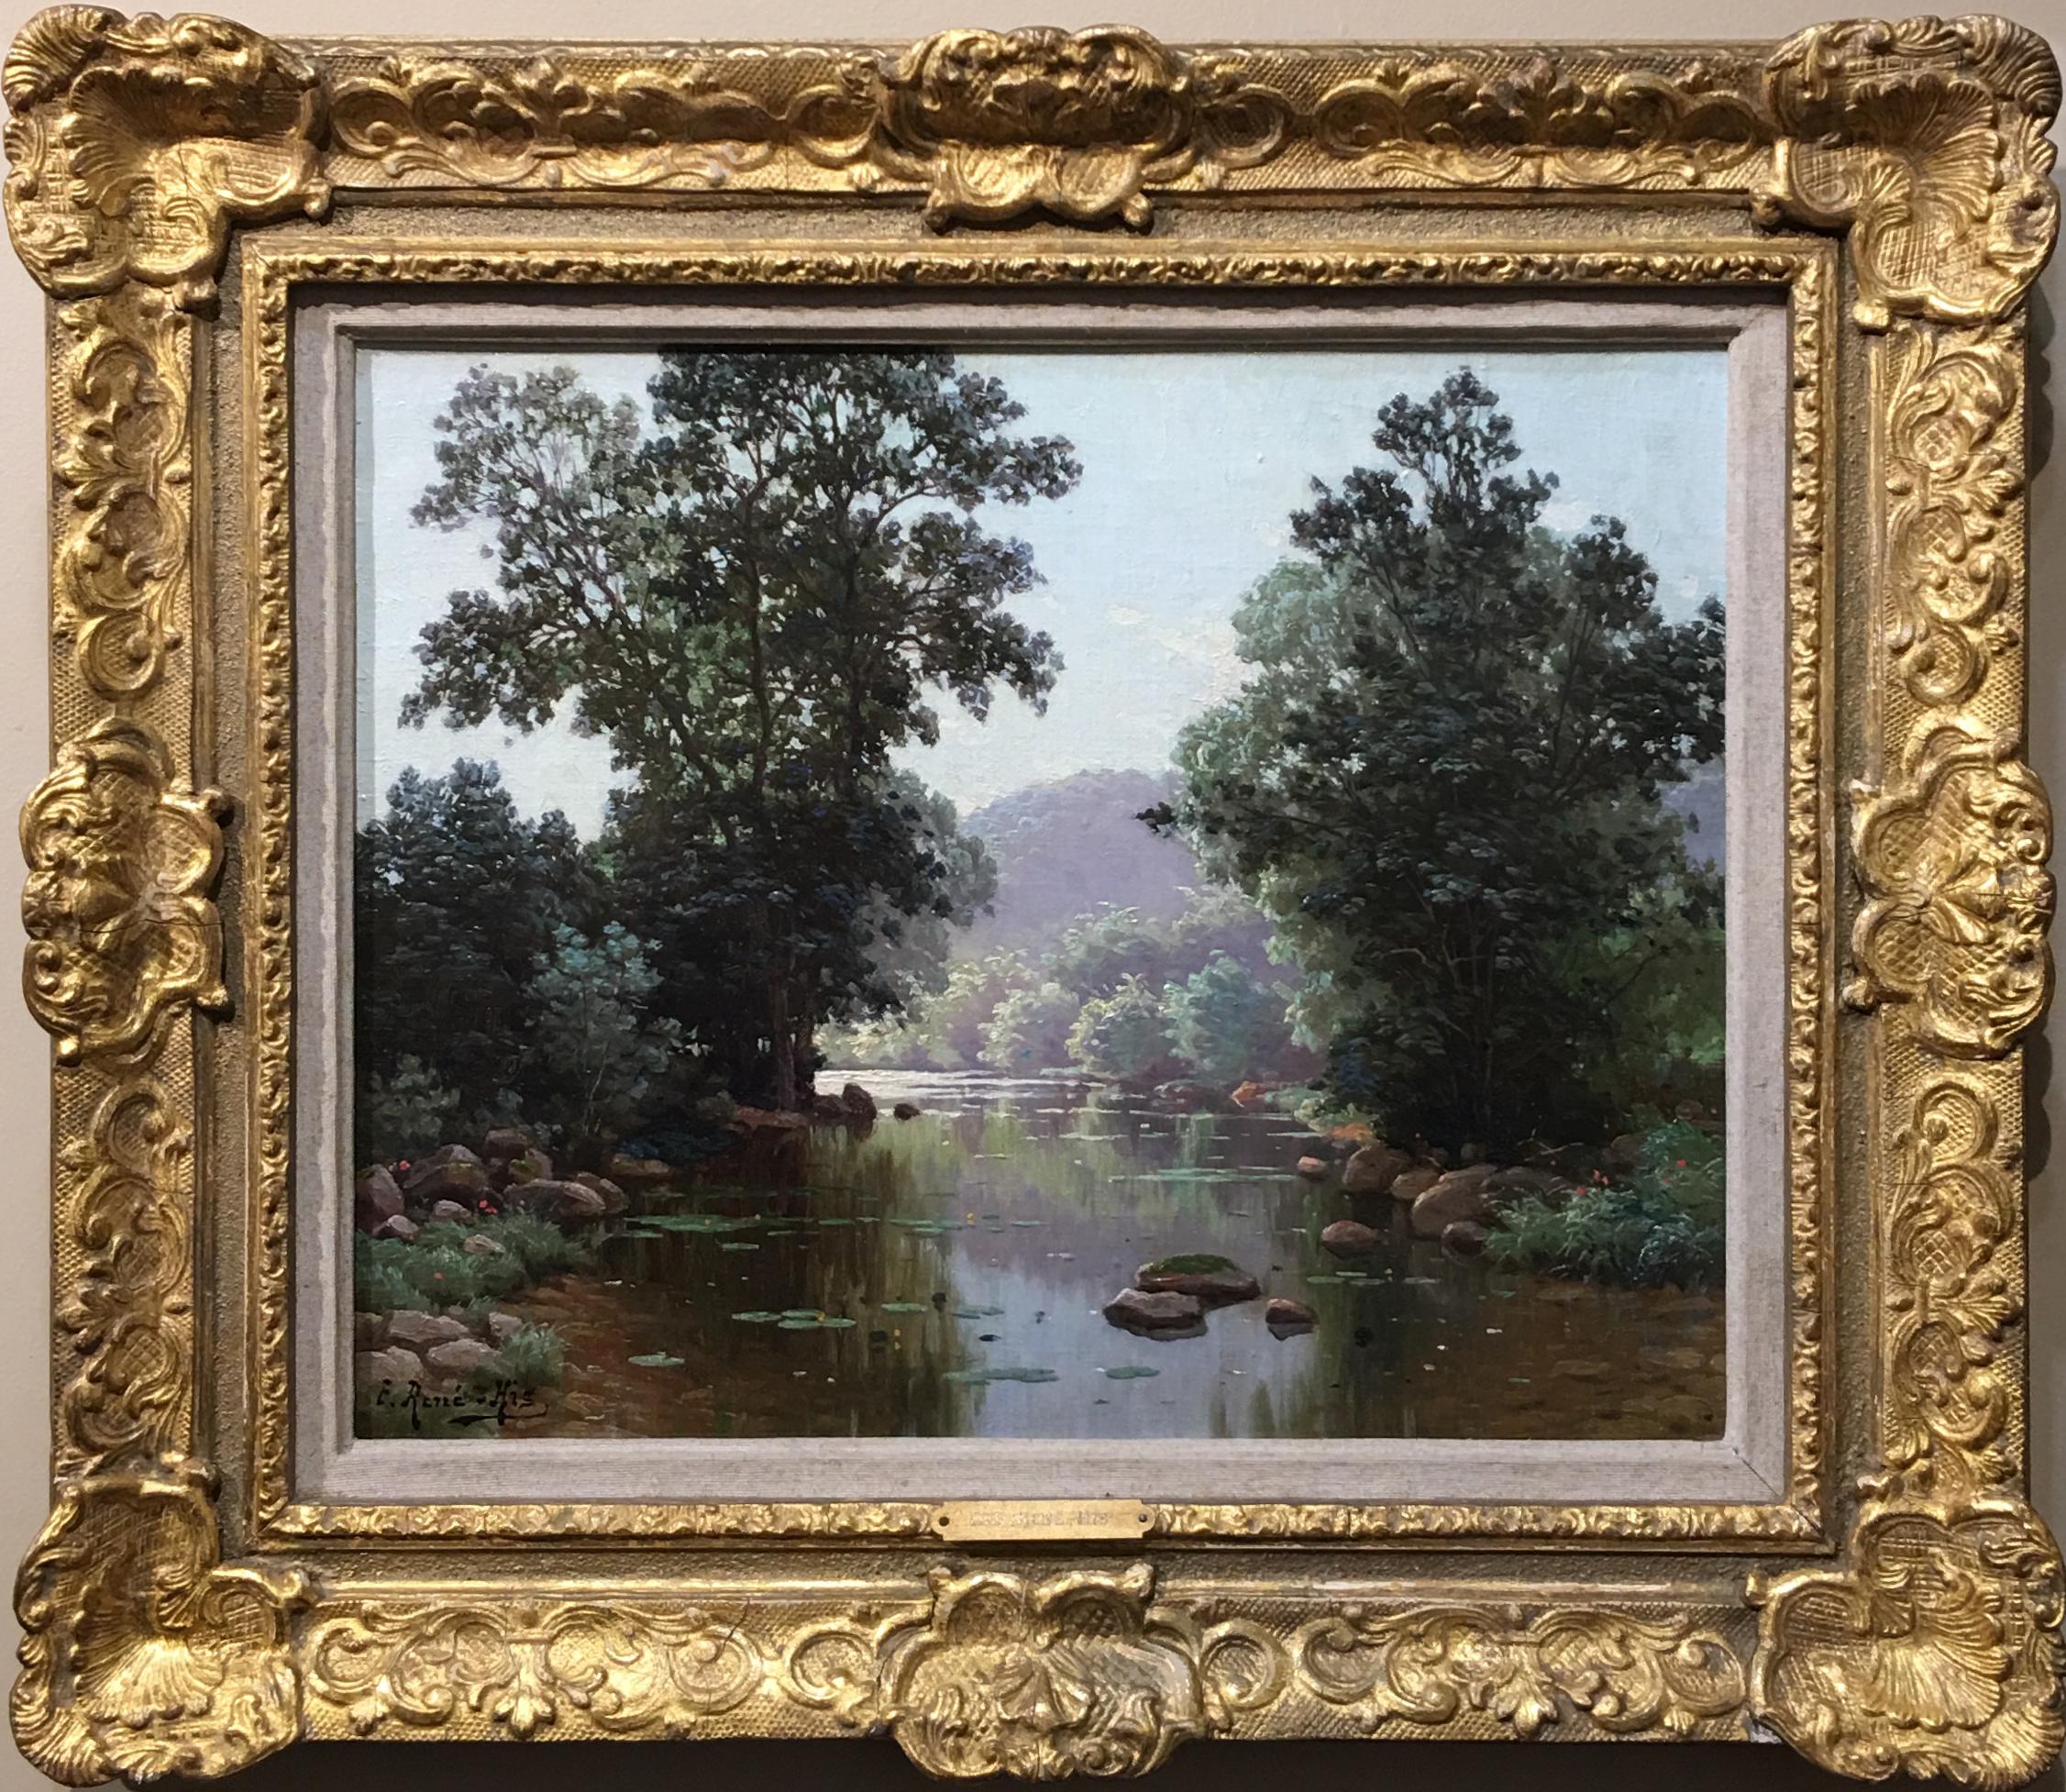 René Charles Edmond His Landscape Painting - A View of the River Through Trees